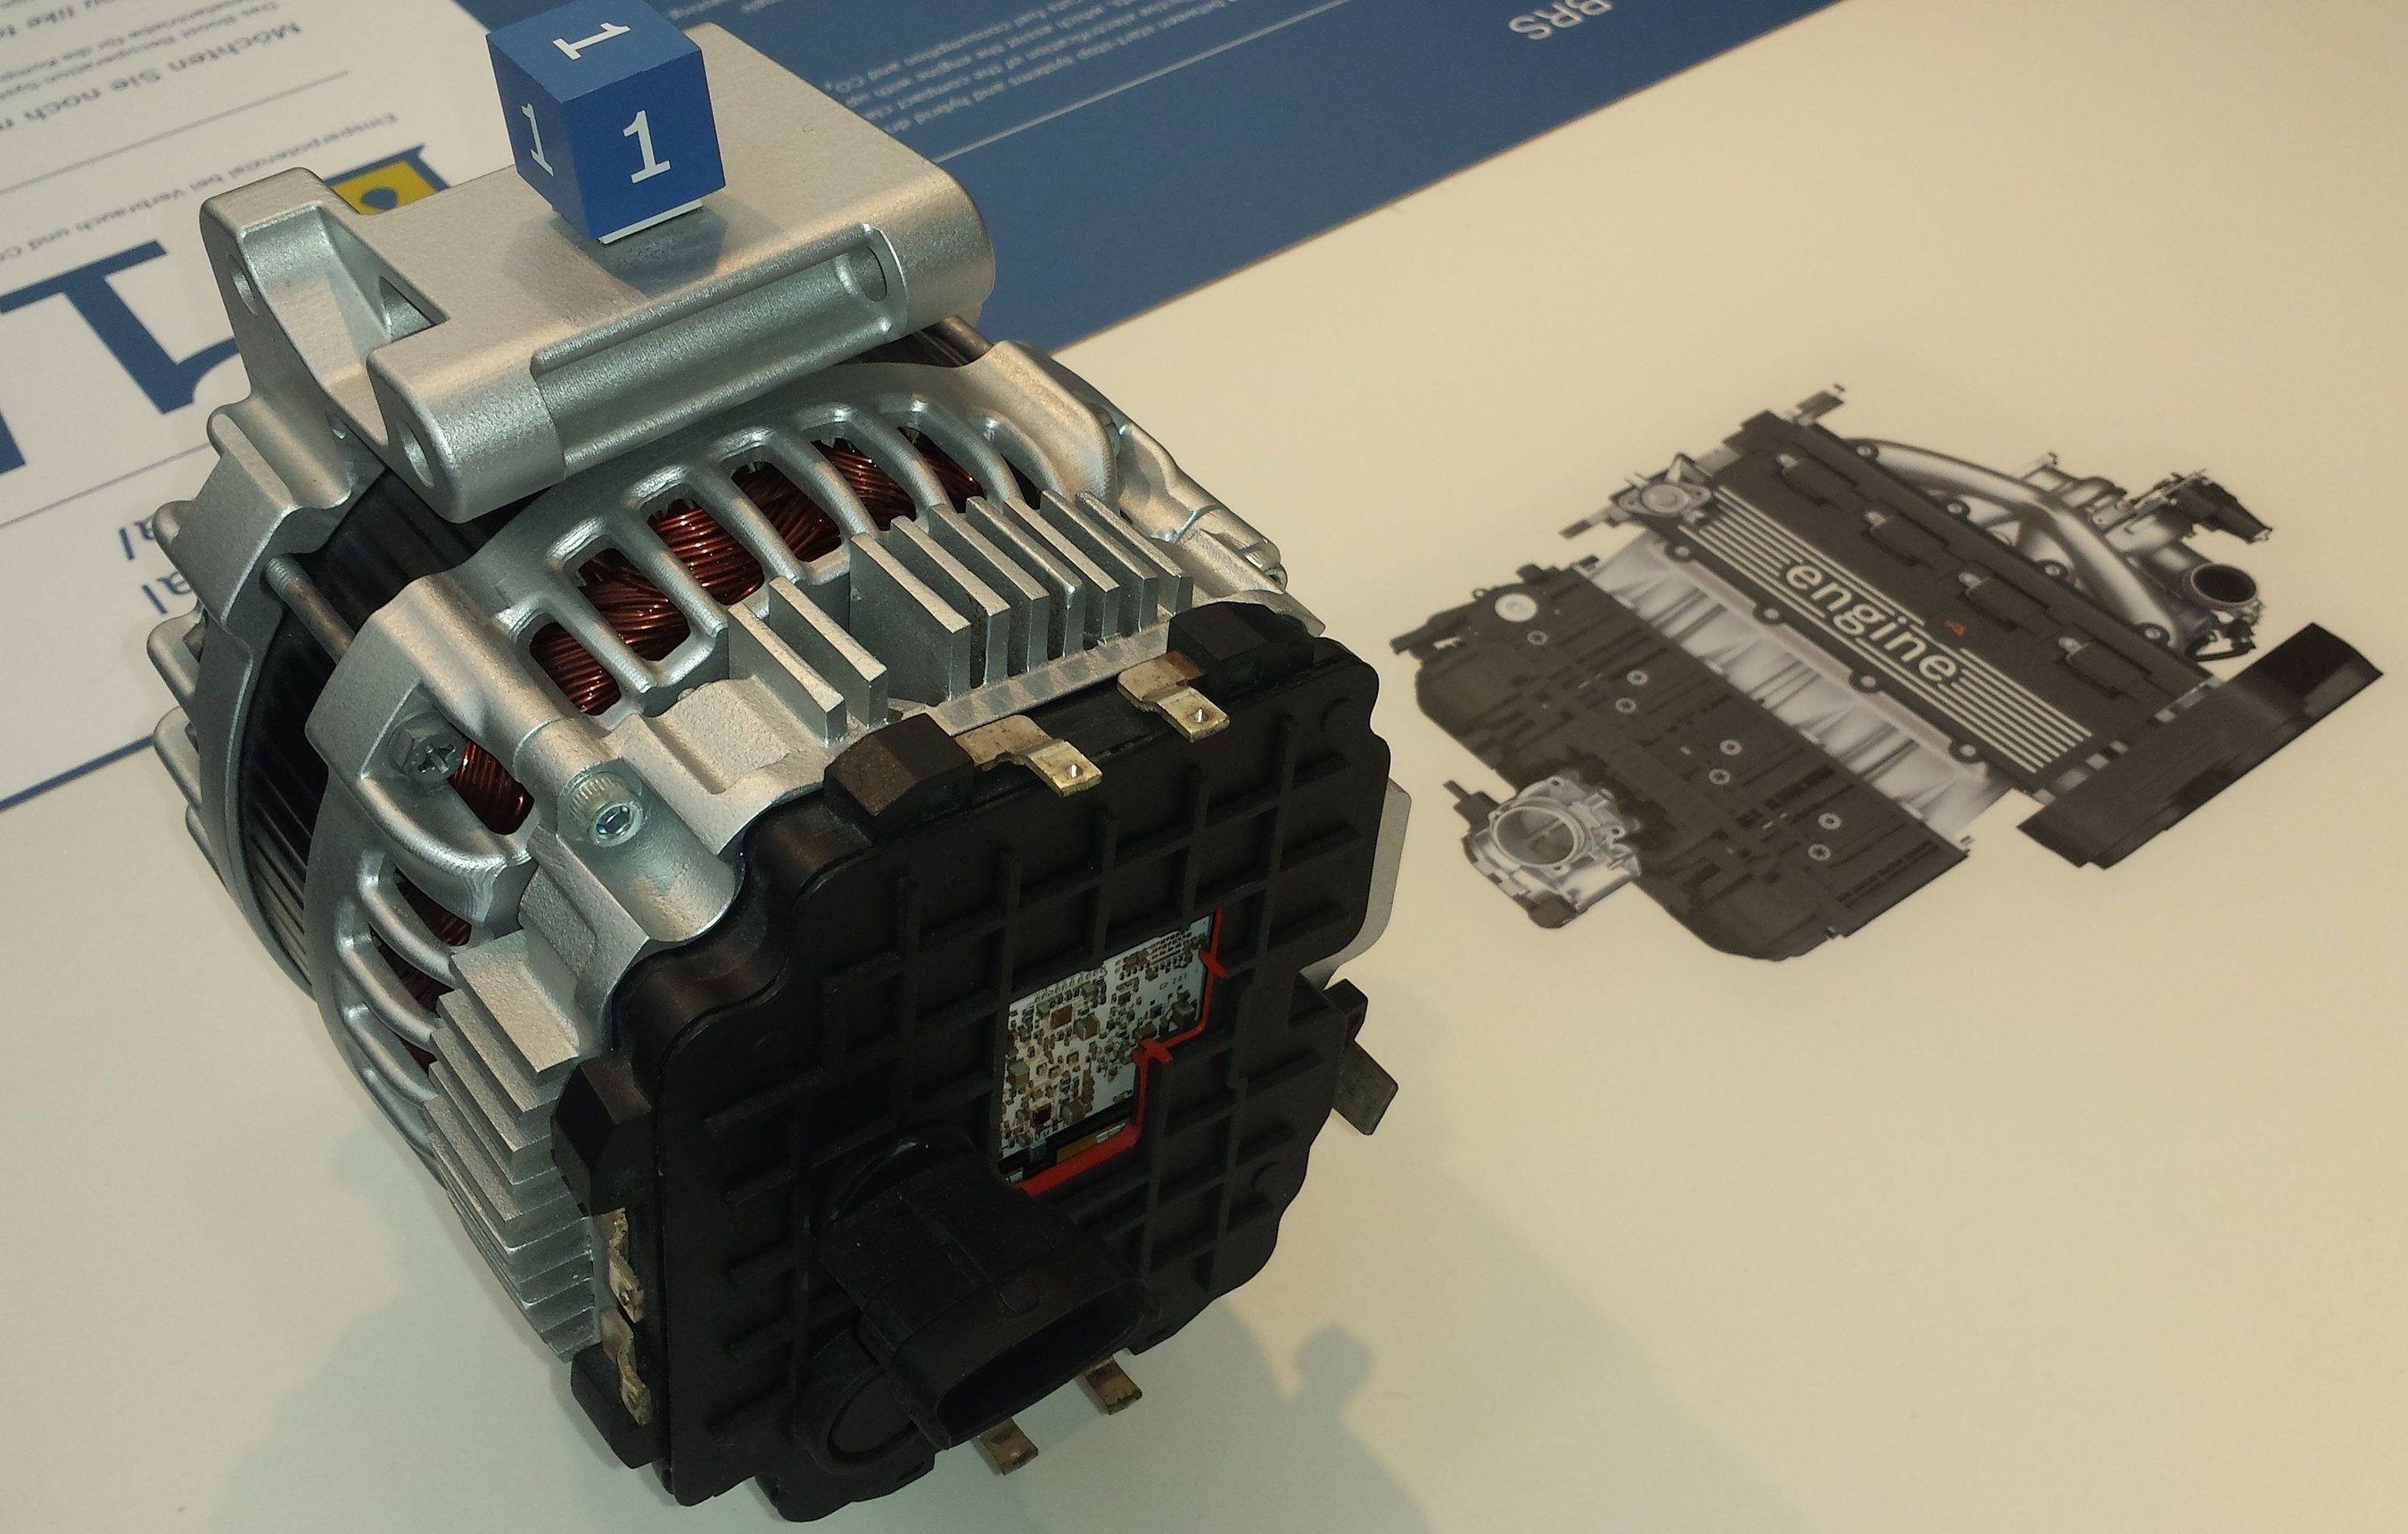 Bosch boost recuperation system (BRS), example of reversible rotating machine for mild hybrid 48V. Source: IDTechEx Photograph. (PRNewsFoto/IDTechEx Research)